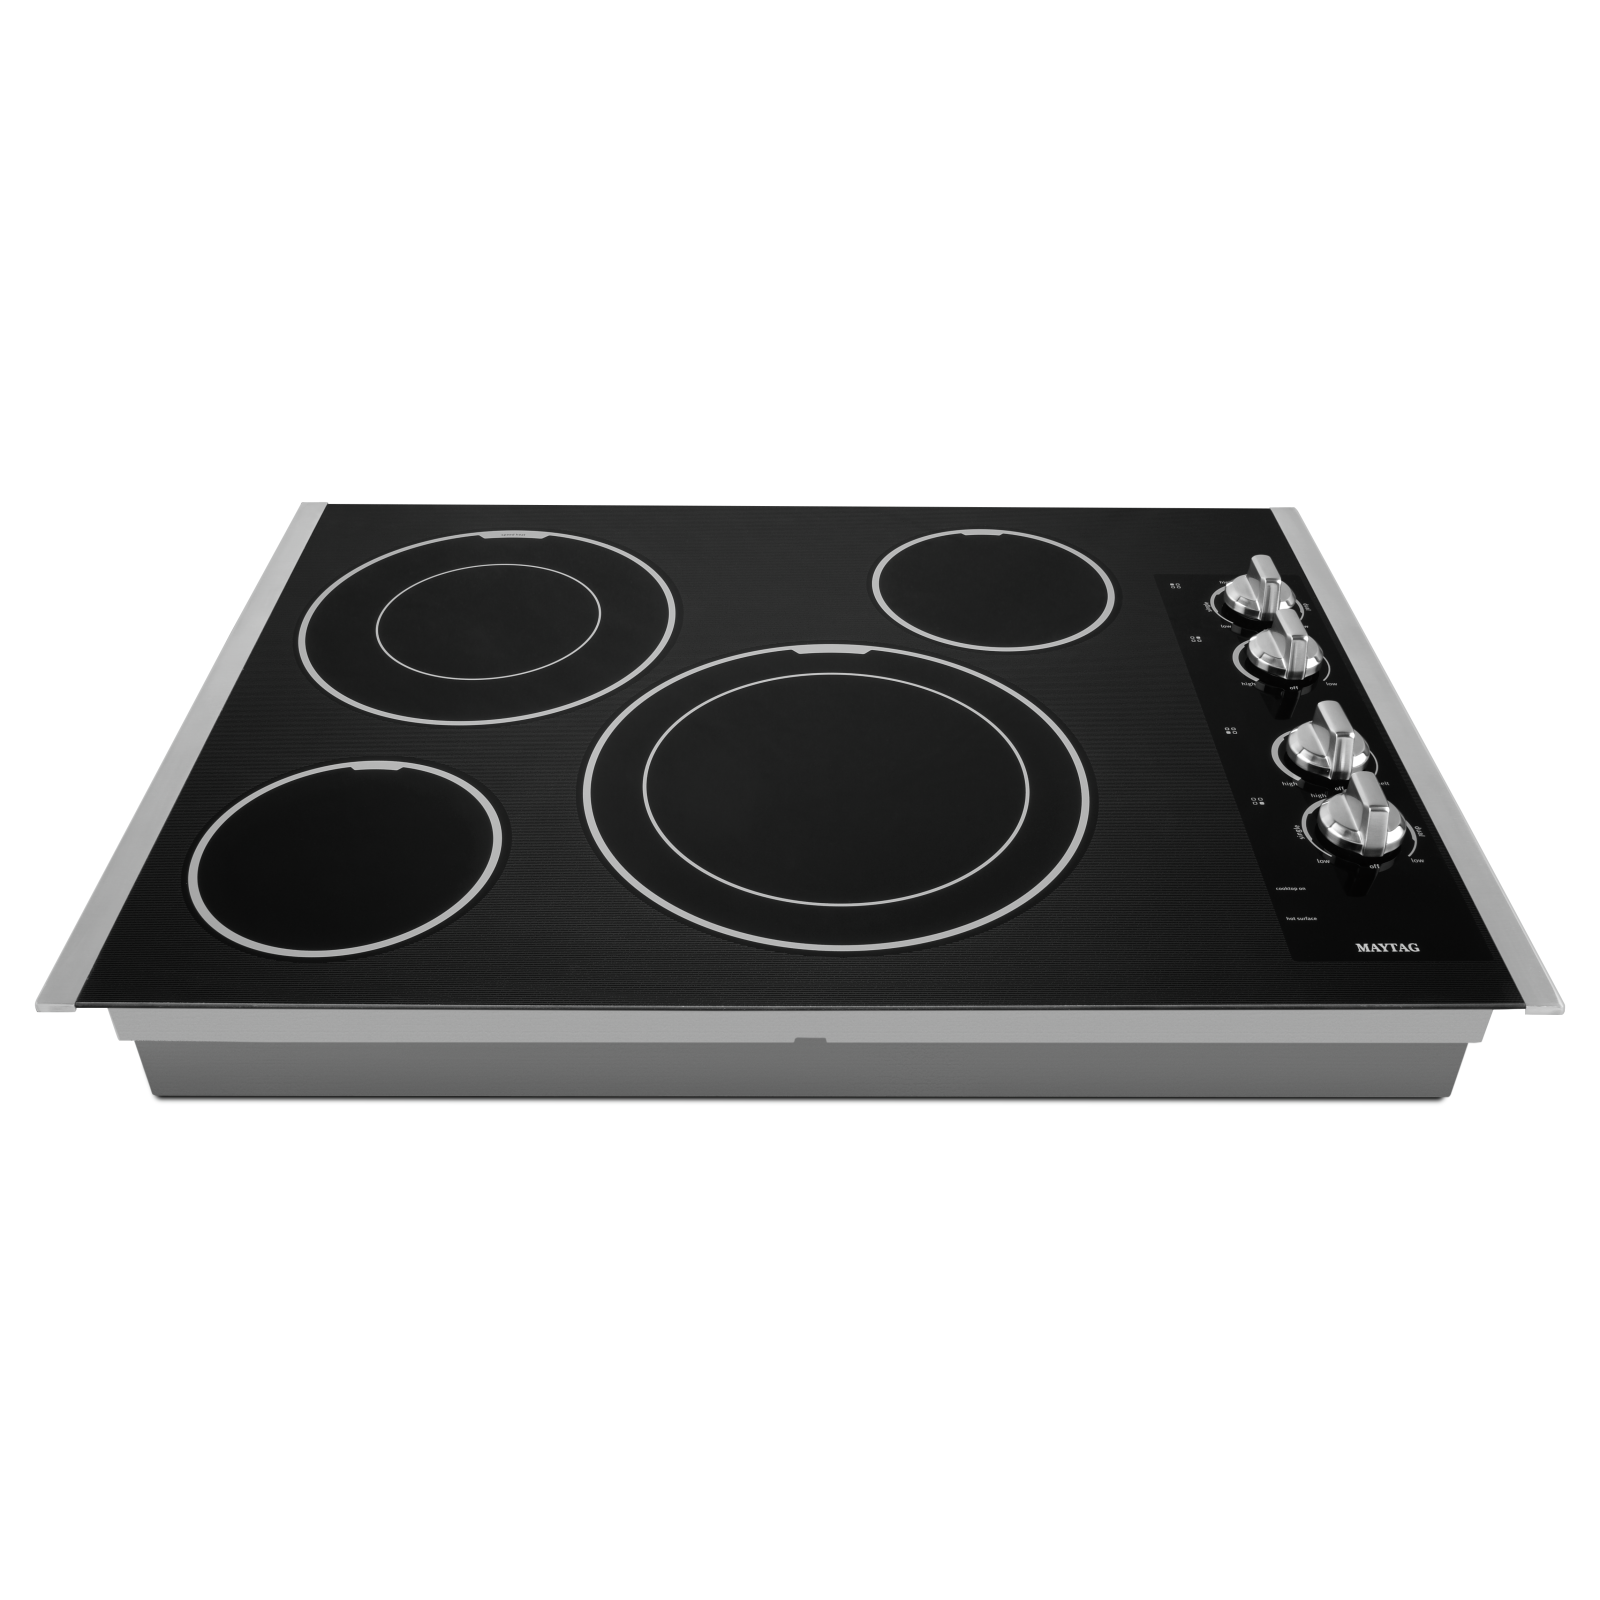 Maytag - 31 Inch Electric Cooktop in Stainless - MEC9530BS